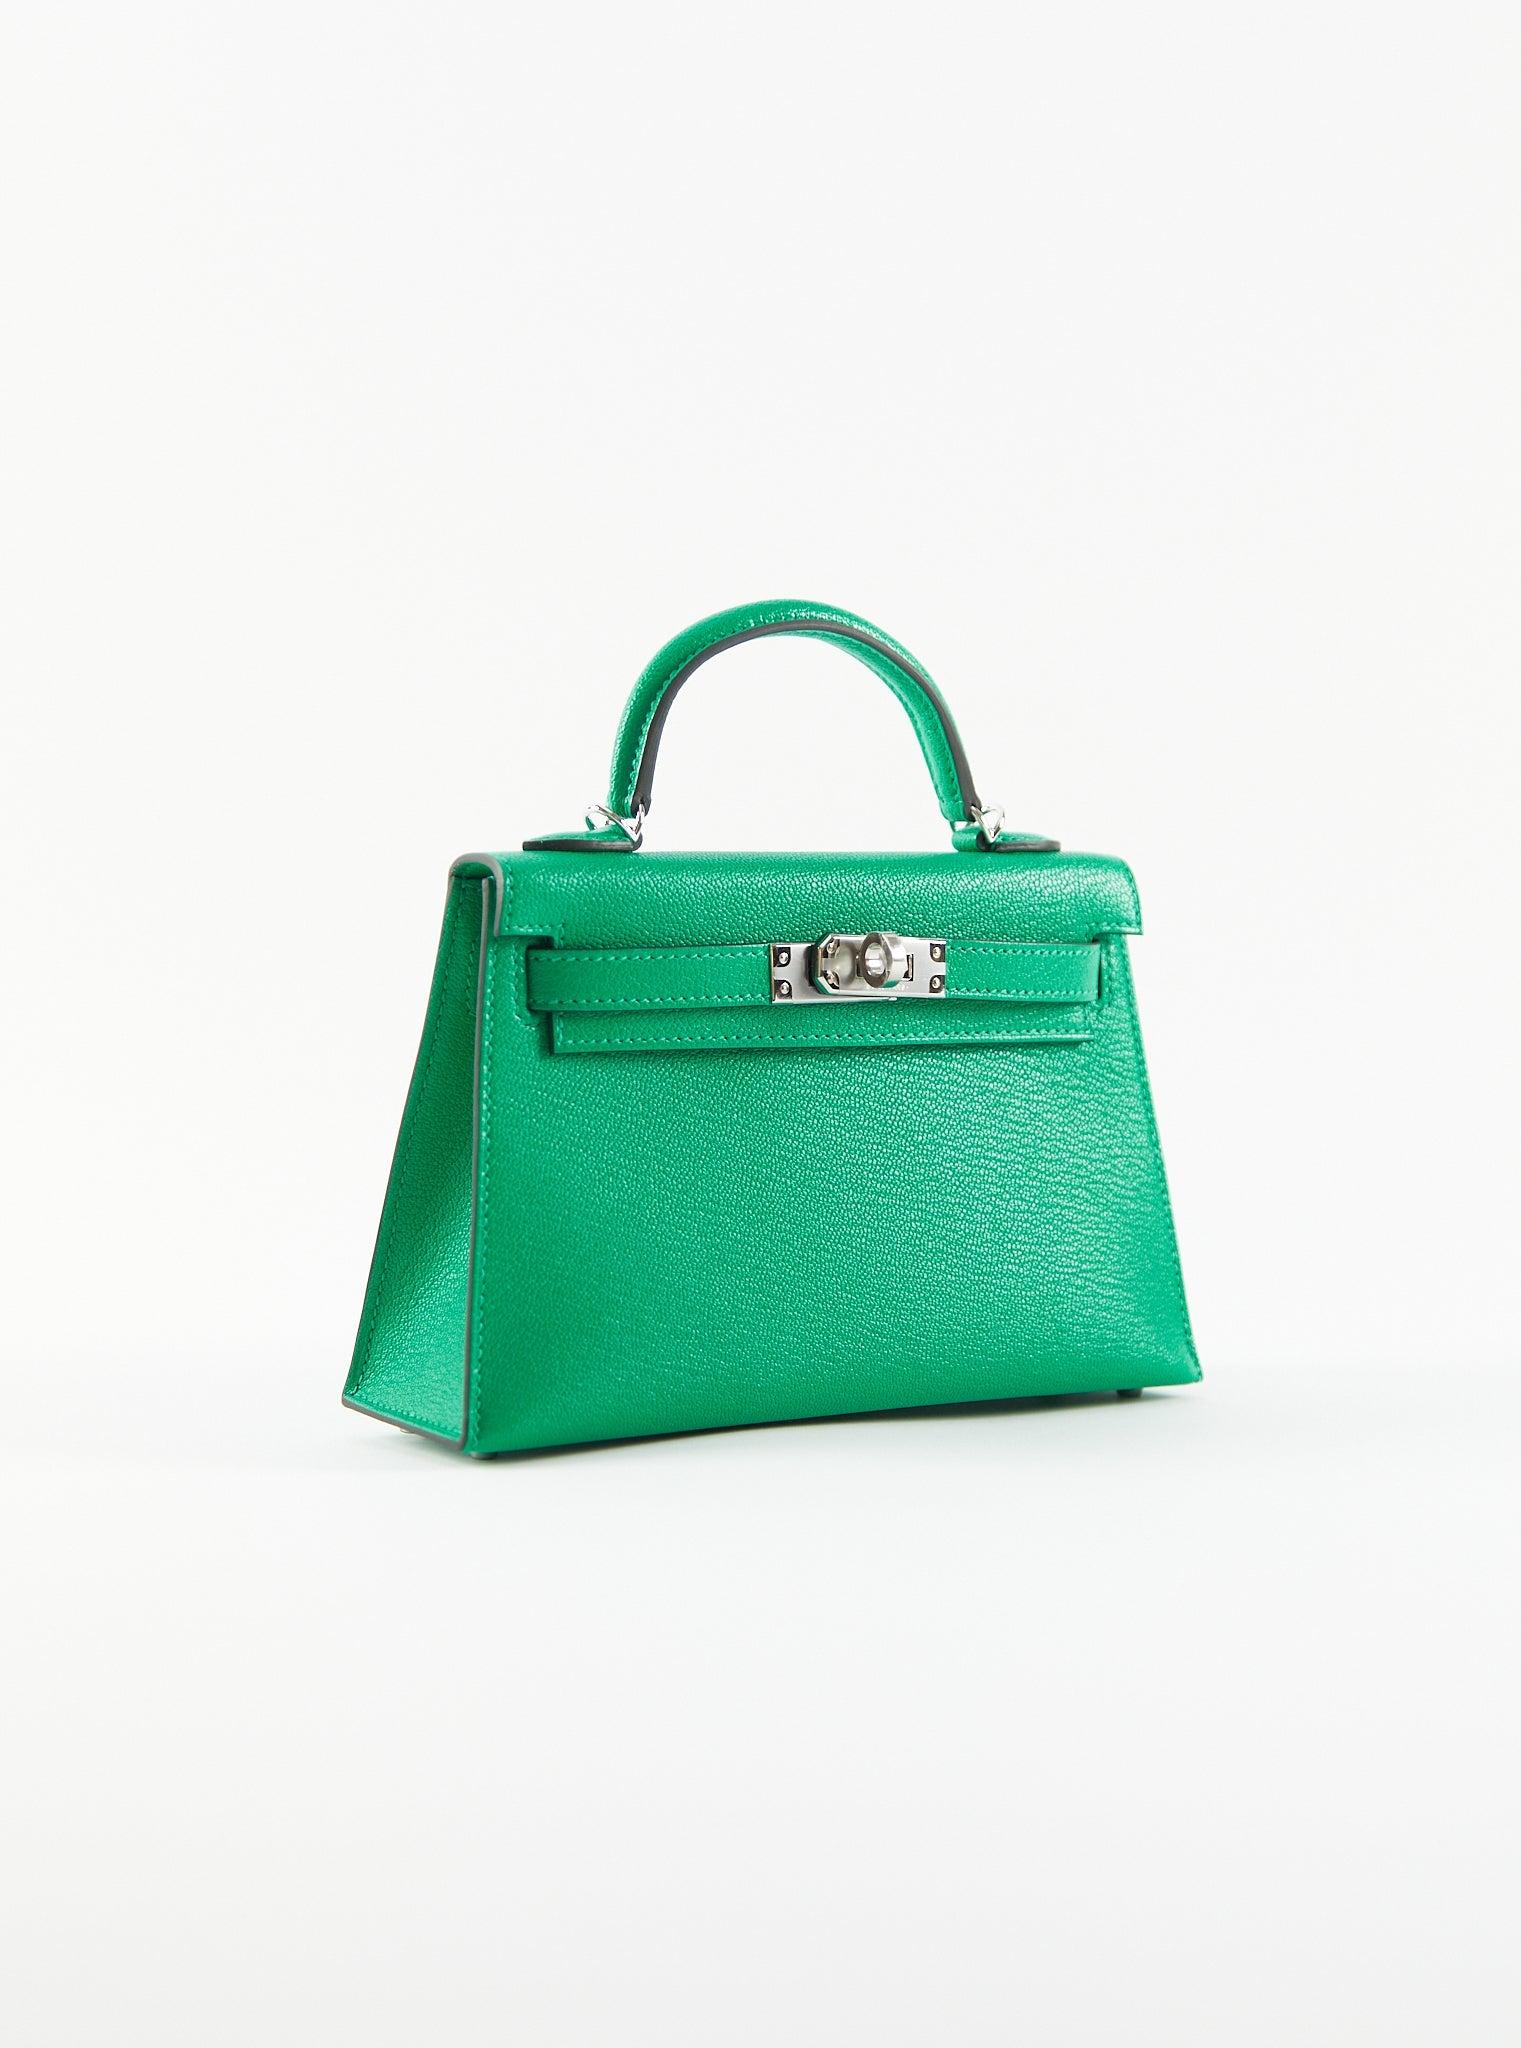 Hermès Mini Kelly 20cm in Menthe

Sellier

Chèvre Leather with Palladium Hardware 

B Stamp / 2023

Accompanied by: Original receipt, Strap, Hermes box, Hermes dustbag, care card and ribbon

Measurements: 7.5